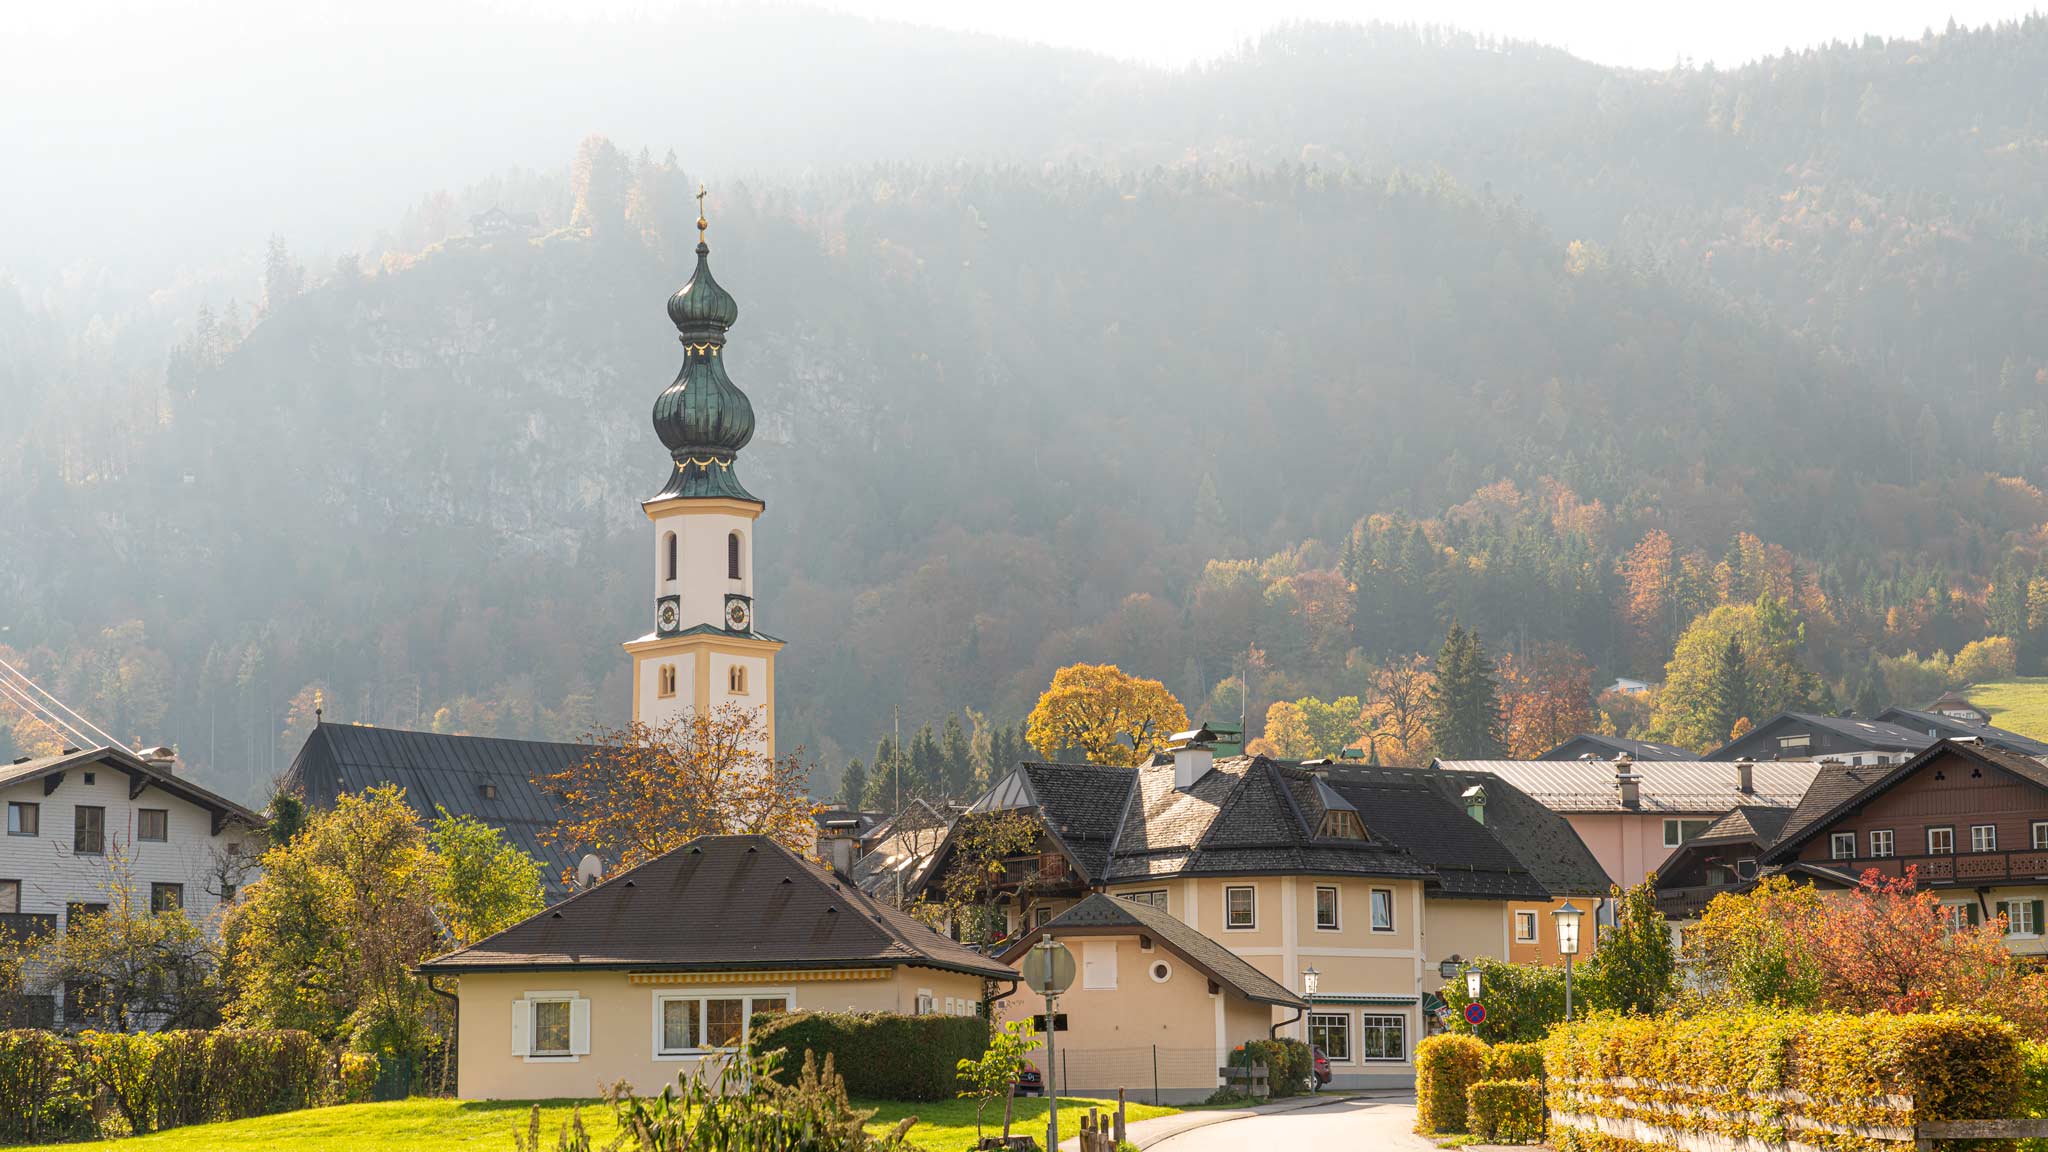 Beautiful mountain and lake views await in Saint Gilgen where a church spire stands infront of a towering mountain